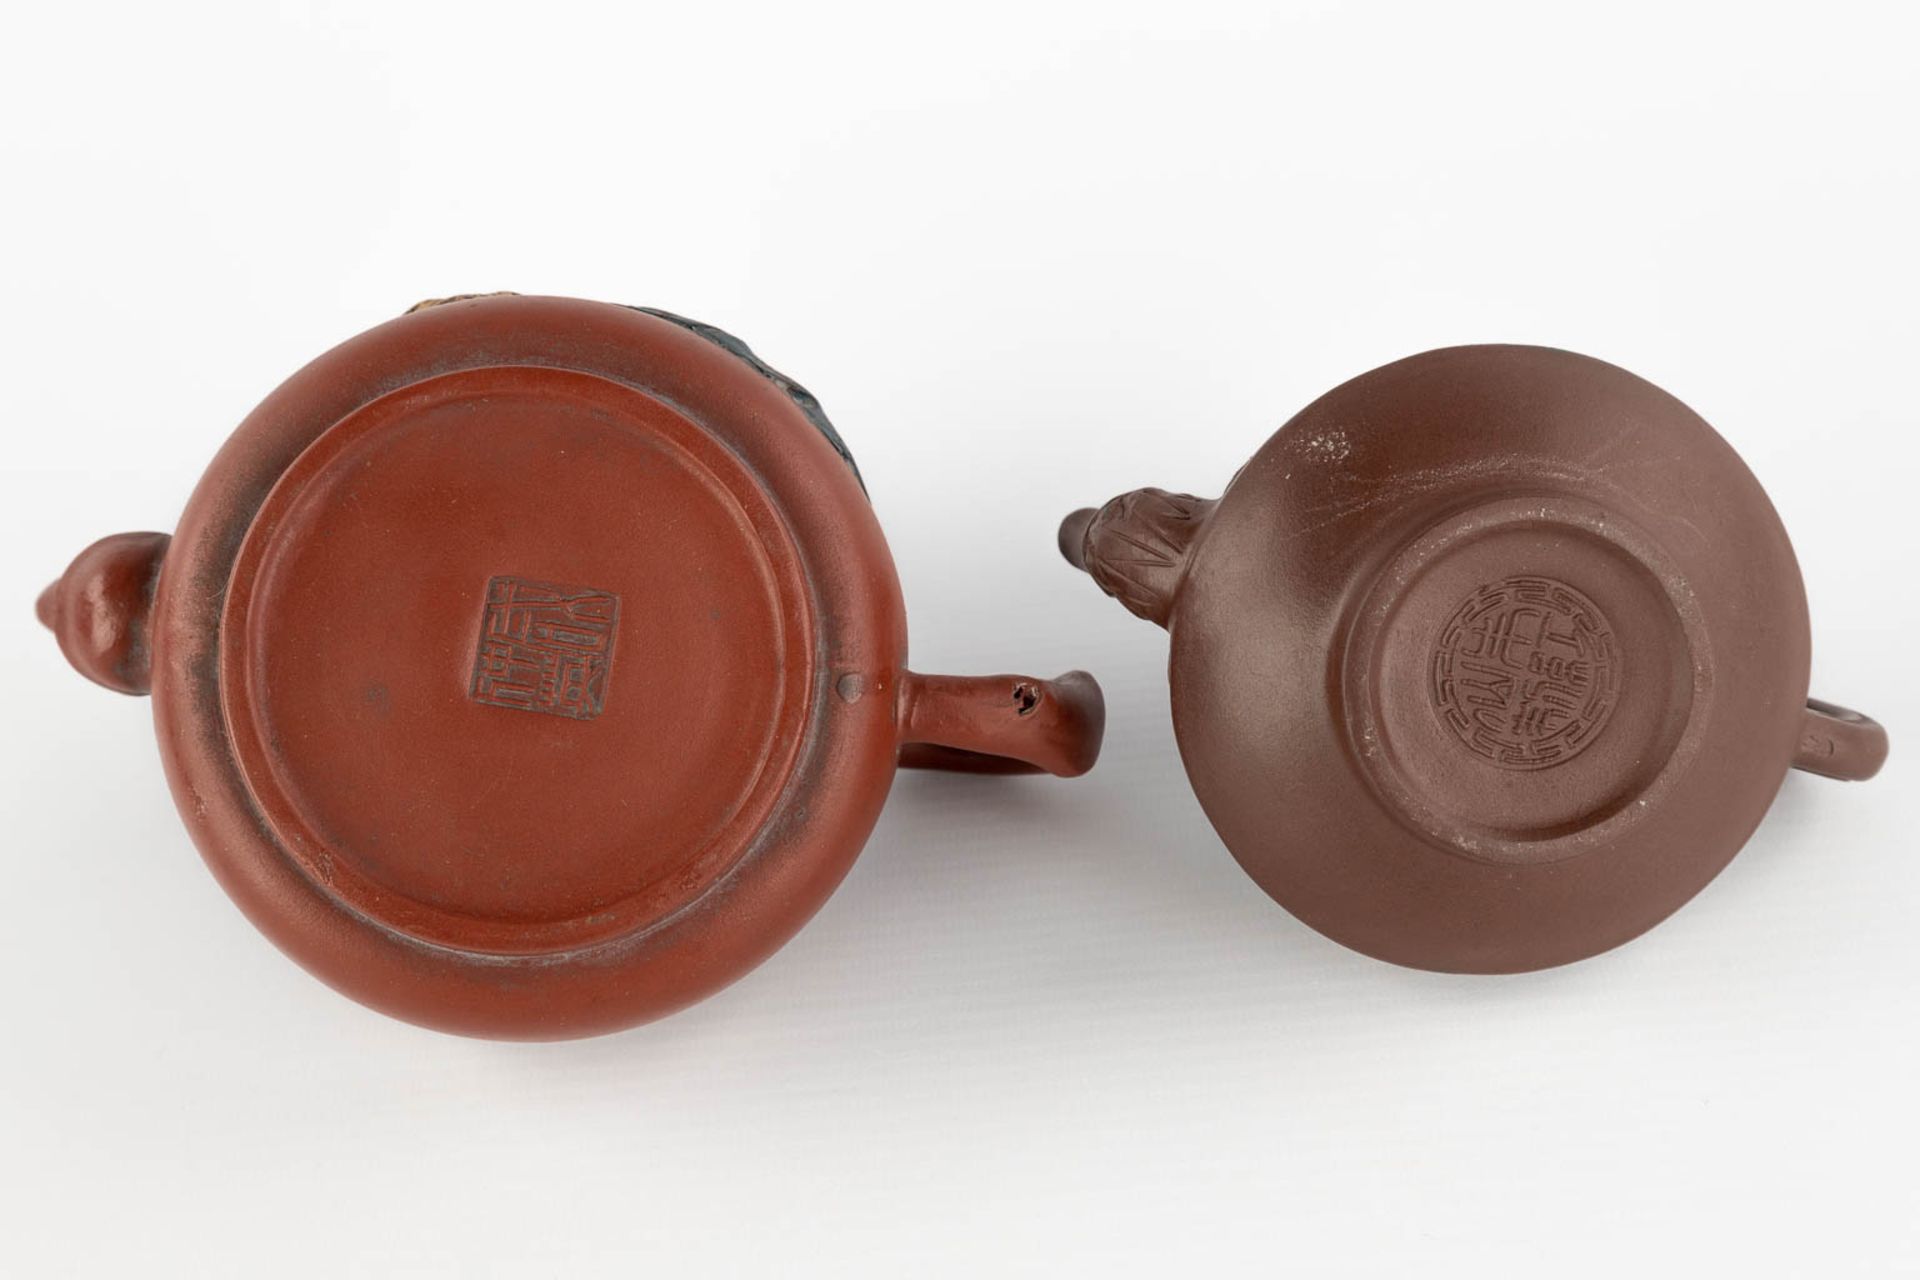 Two Chinese Yixing stoneware teapots, 20th C. (L:11 x W:18 x H:10 cm) - Image 8 of 18